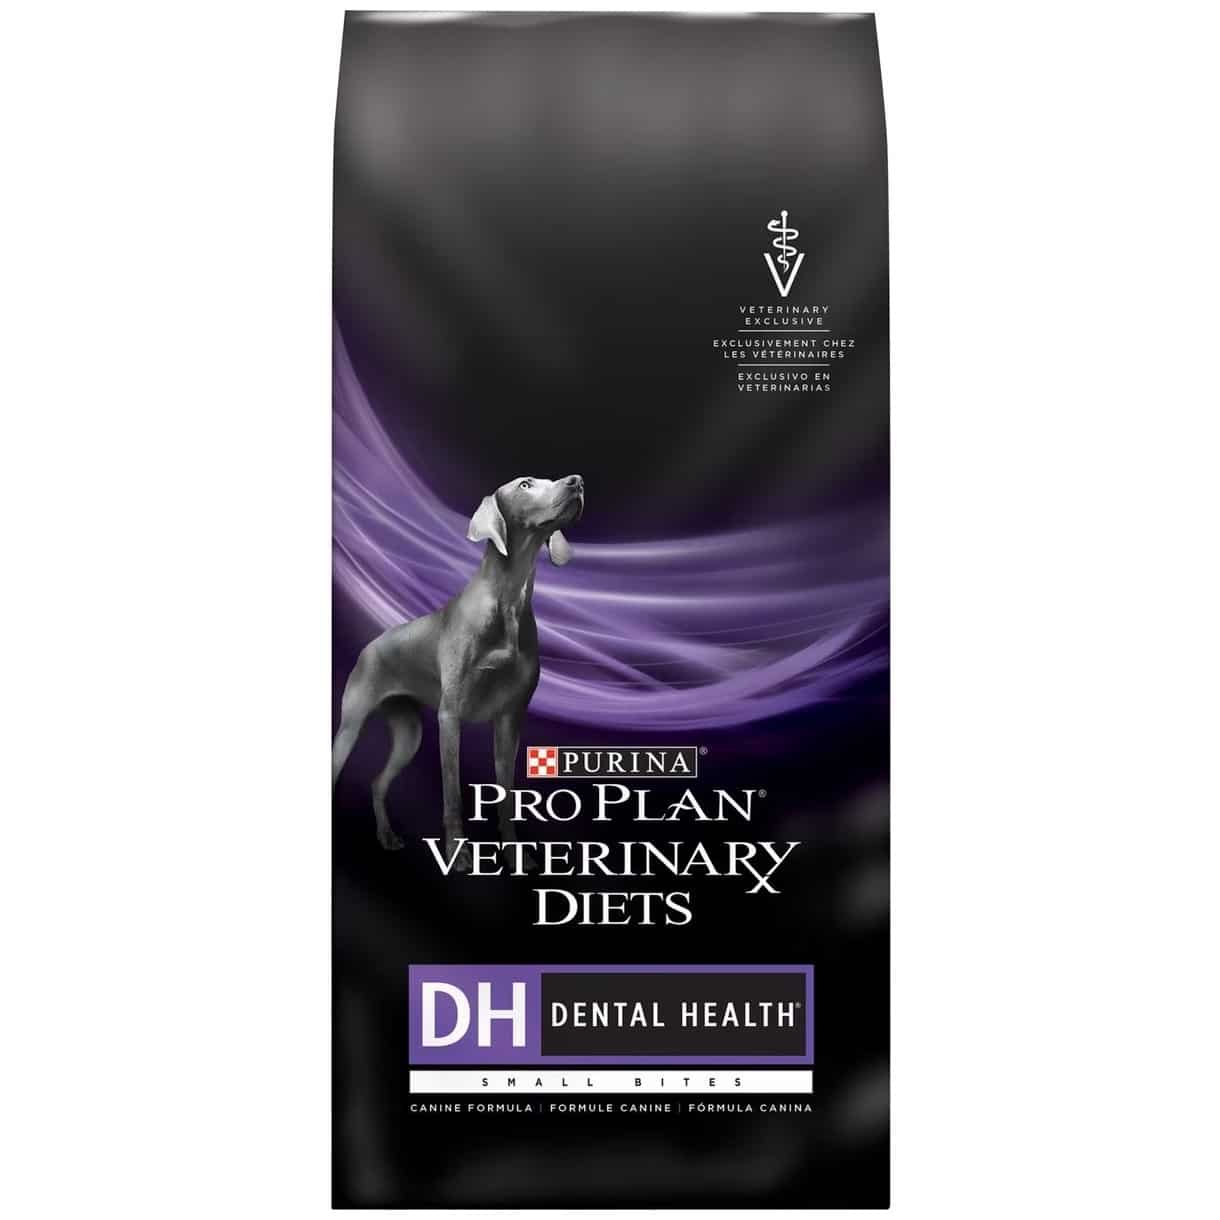 Purina Pro Plan Veterinary Diets DH Dental Health Small Bites Dry Dog Food